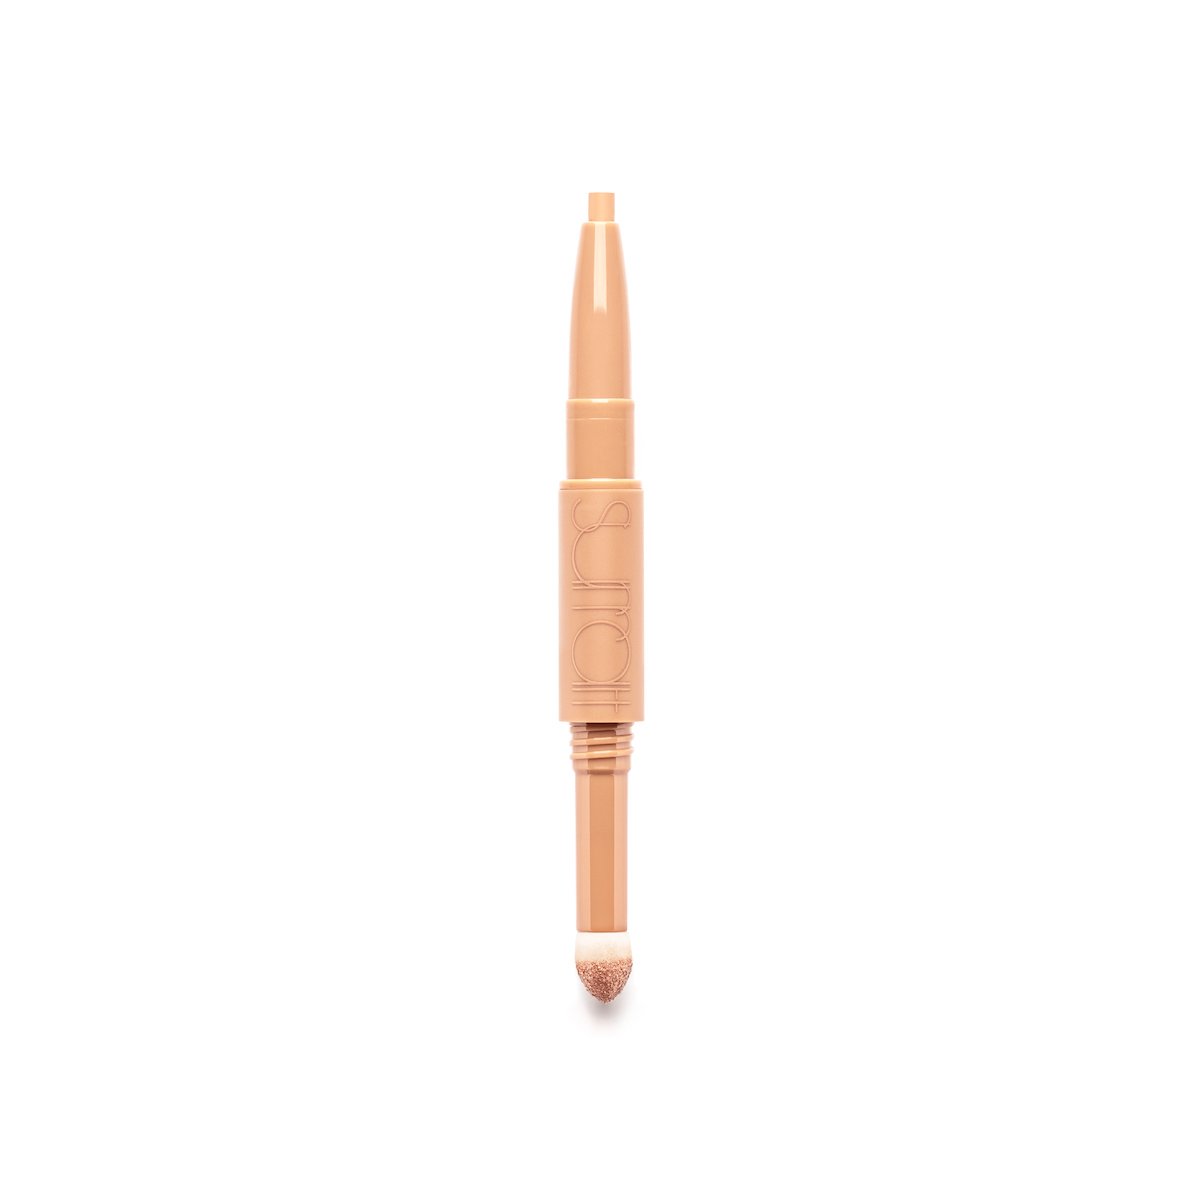 EFFERVESCE - Peach and Rose Gold Sparkle - dual-ended eye baton with clarifying waterline liner in peach and corresponding shimmering powder in rose gold sparkle